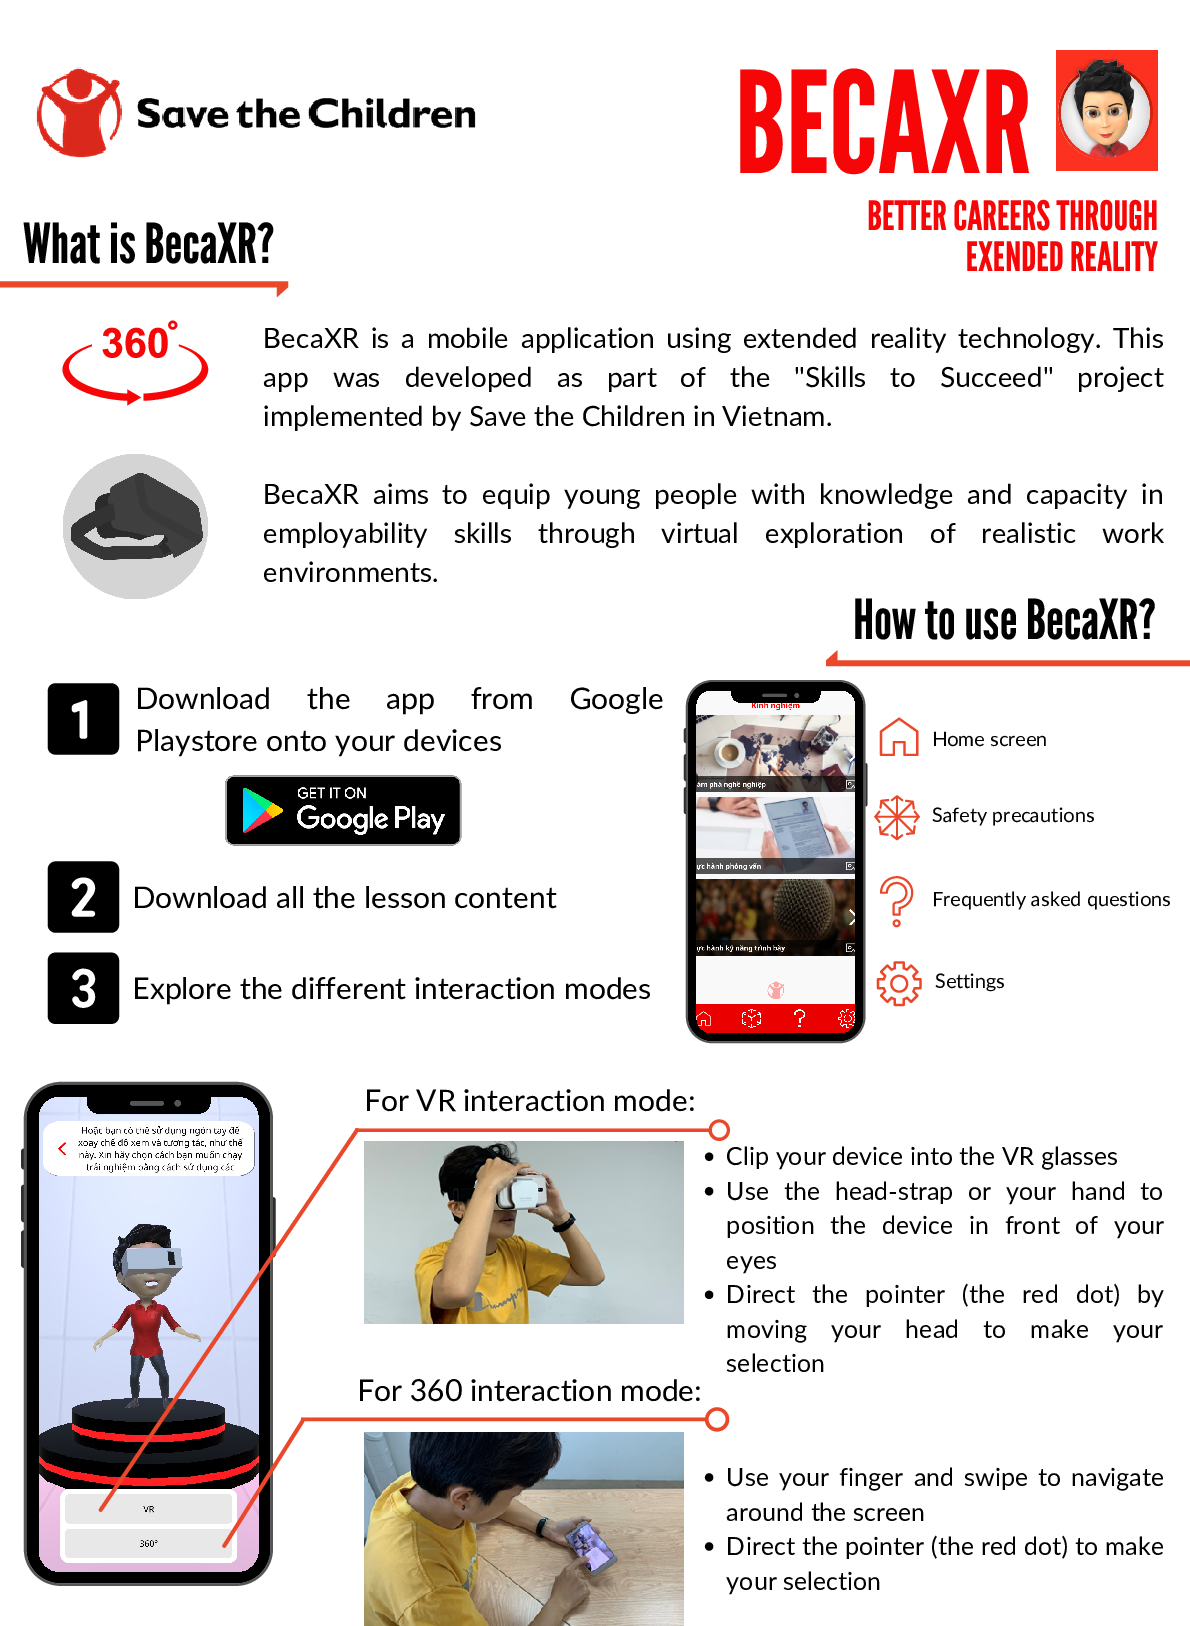 BECAXR: Better Careers Through Extended Reality